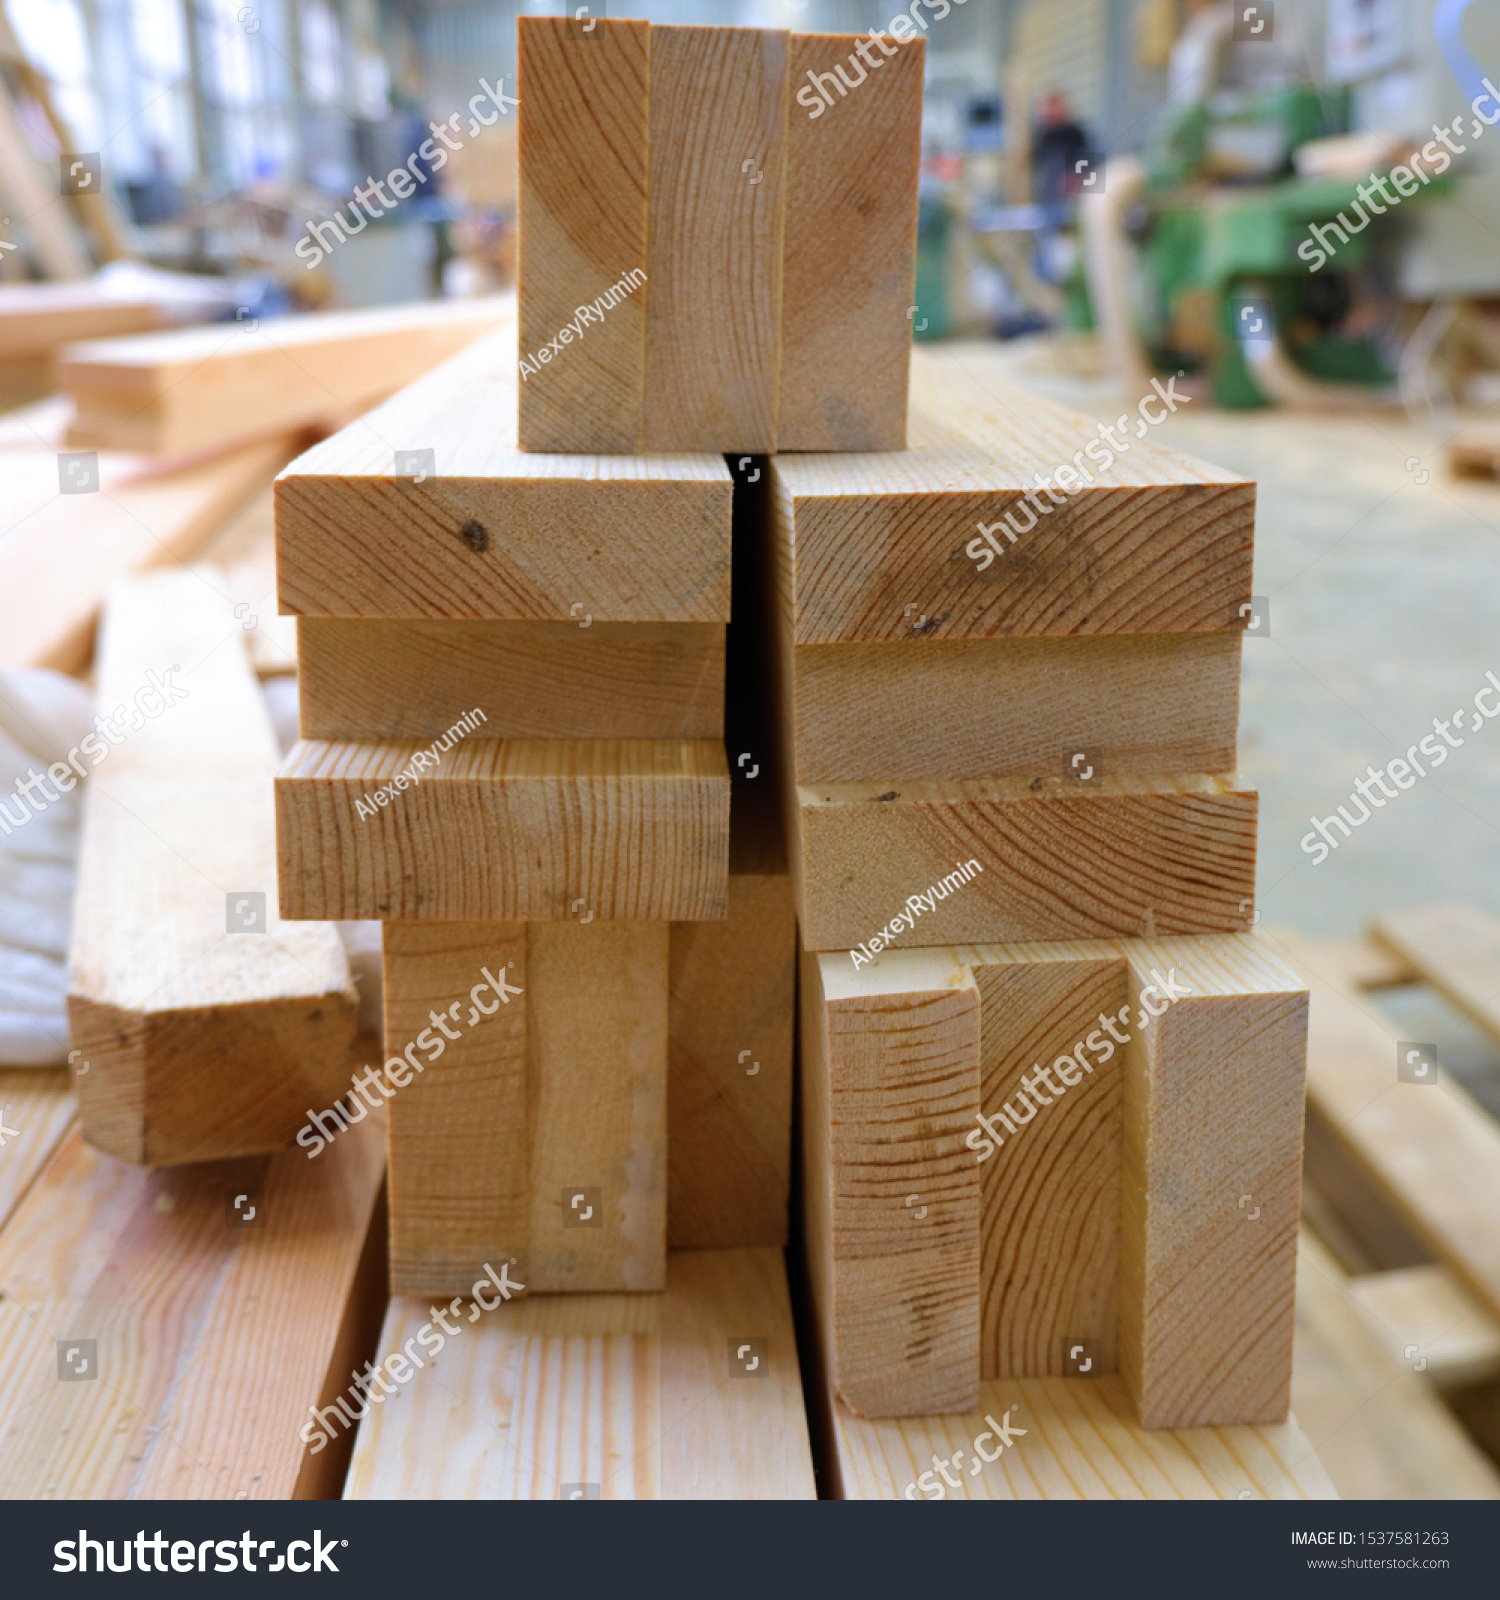 View from butt of stack of three-layer wooden glued laminated timber beams from pine finger joint spliced boards for wooden windows